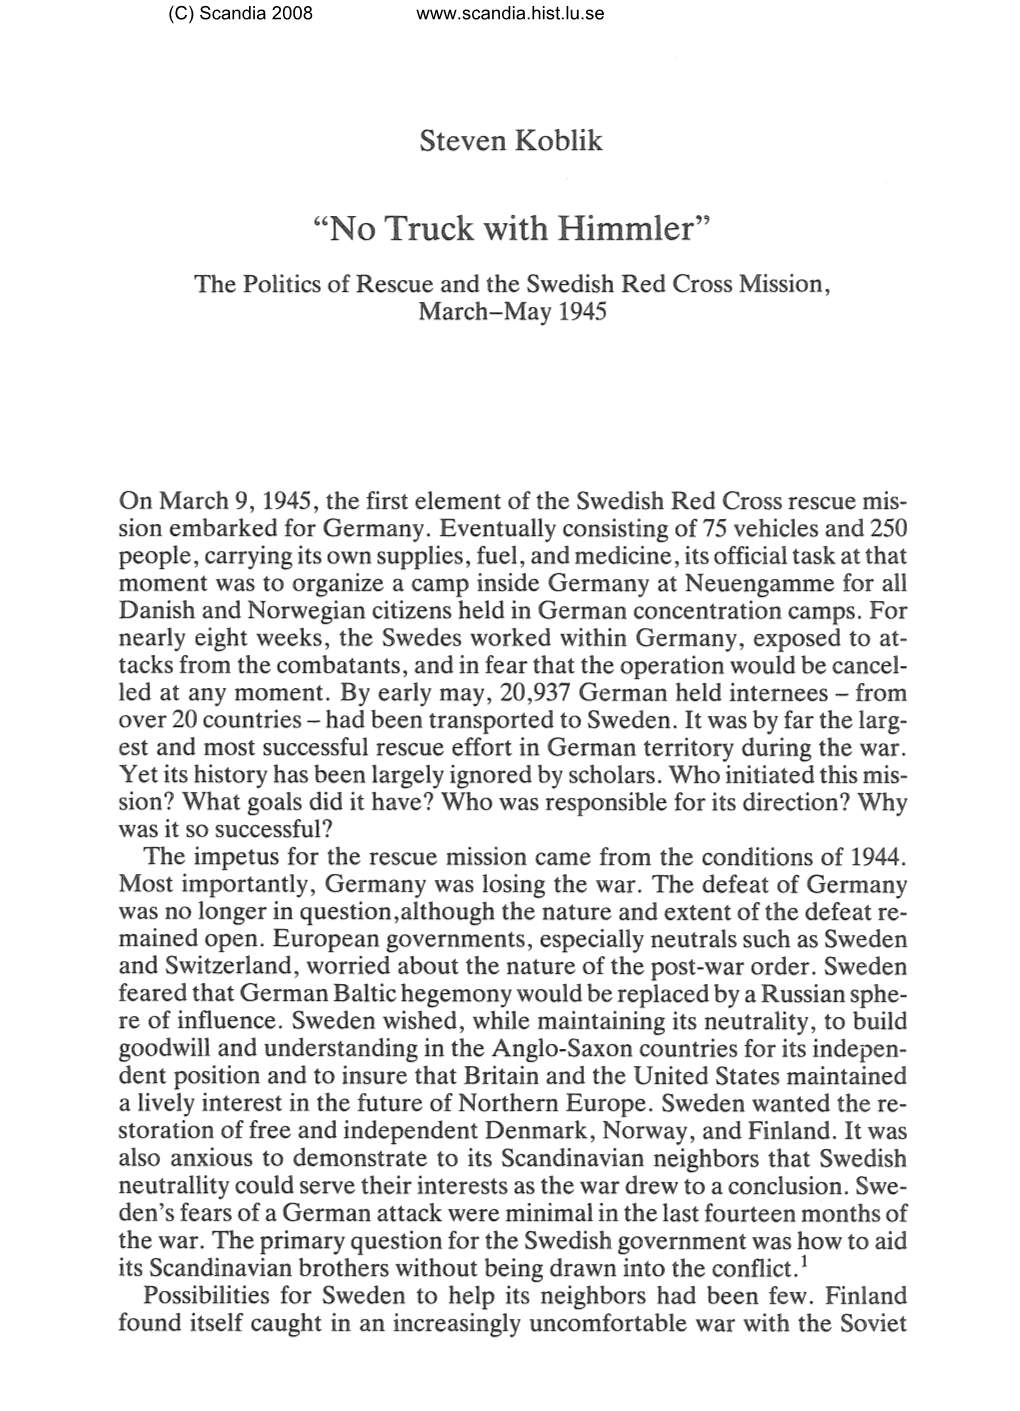 "No Truck With. Himmler" the Politics of Rescue and the Swedish Wed Cross Mission, March-May 194:S